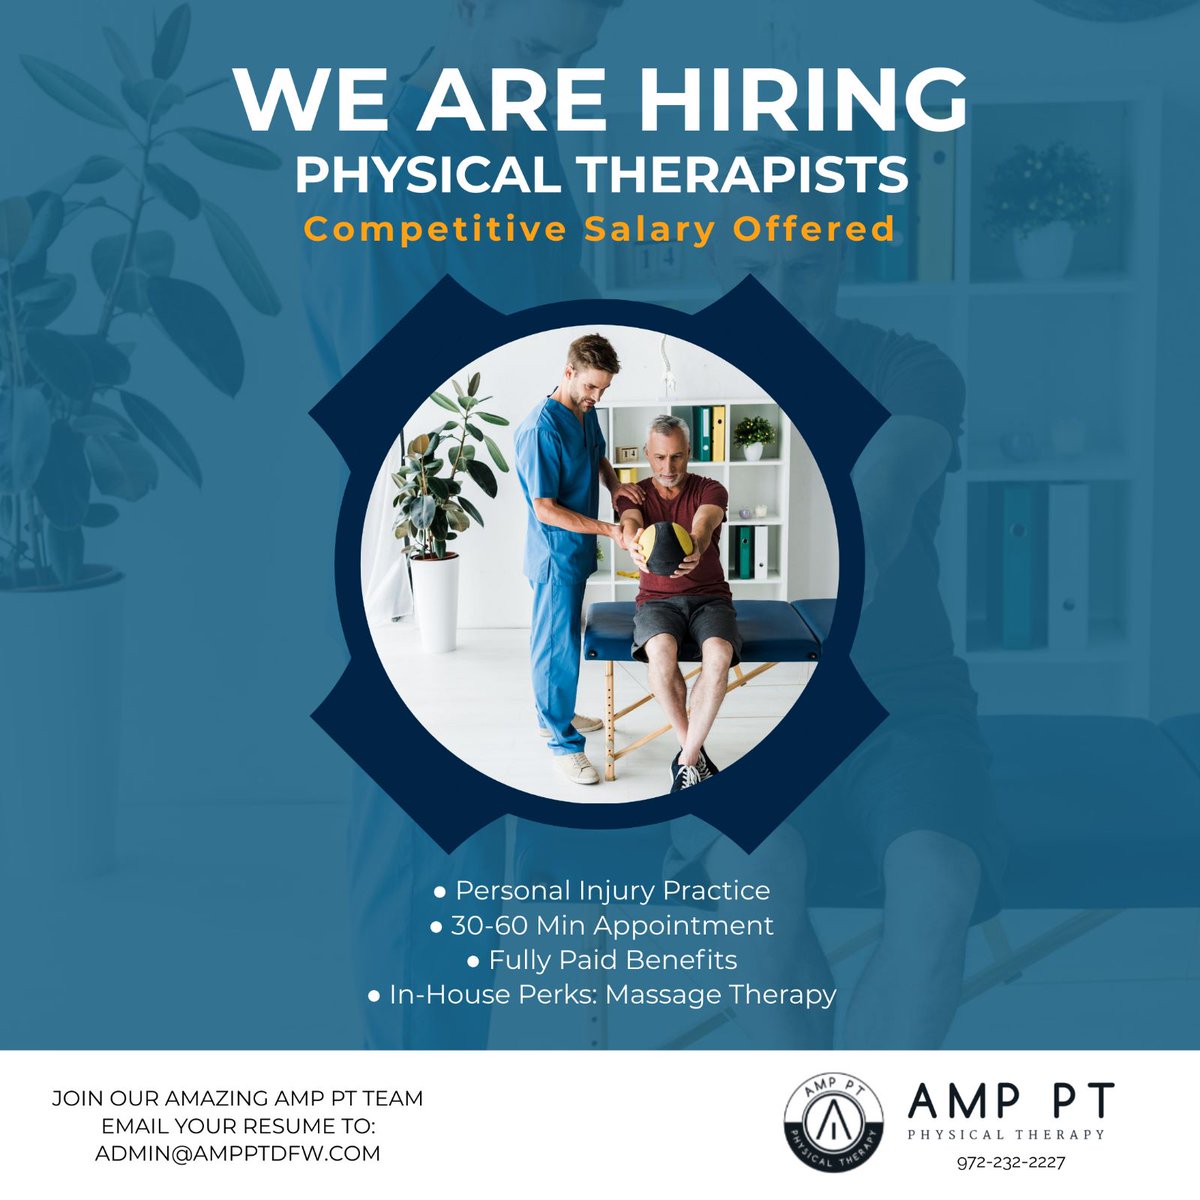 Guess what? We are hiring!
AMP PT Physical Therapy Clinics is accepting applications for PTs.
Send your resume to: Admin@ampptdfw.com and join our amazing AMP PT Team!
#ircclinic #ampptdfw #hiring #hiringpt #hiringpts #pt #physicaltherapy #txjobs #dallasjobs  #fullbenefits #jobs